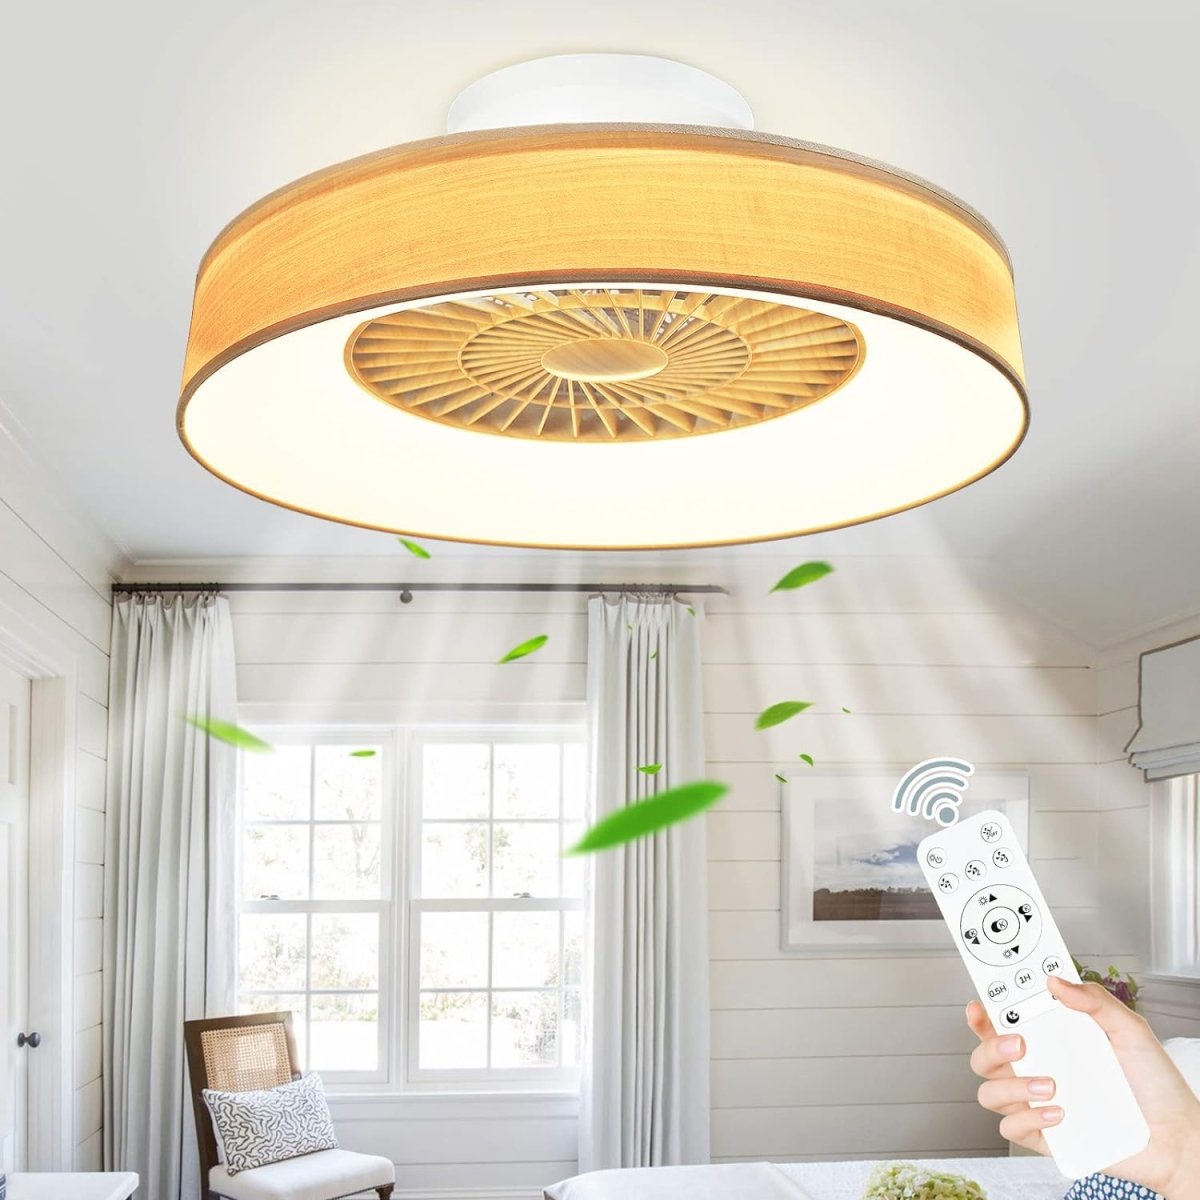 DLLT Low Profile Ceiling Fan - 22.5 Inch Bladeless Ceiling Fan with Light and Remote, 3 Colors Dimmable LED 3 Speeds 5 Blades Enclosed Ceiling Fans with Light for Living Room Bedroom, Wood Grain - WS-FPZ47-40C-WG 2 | DEPULEY